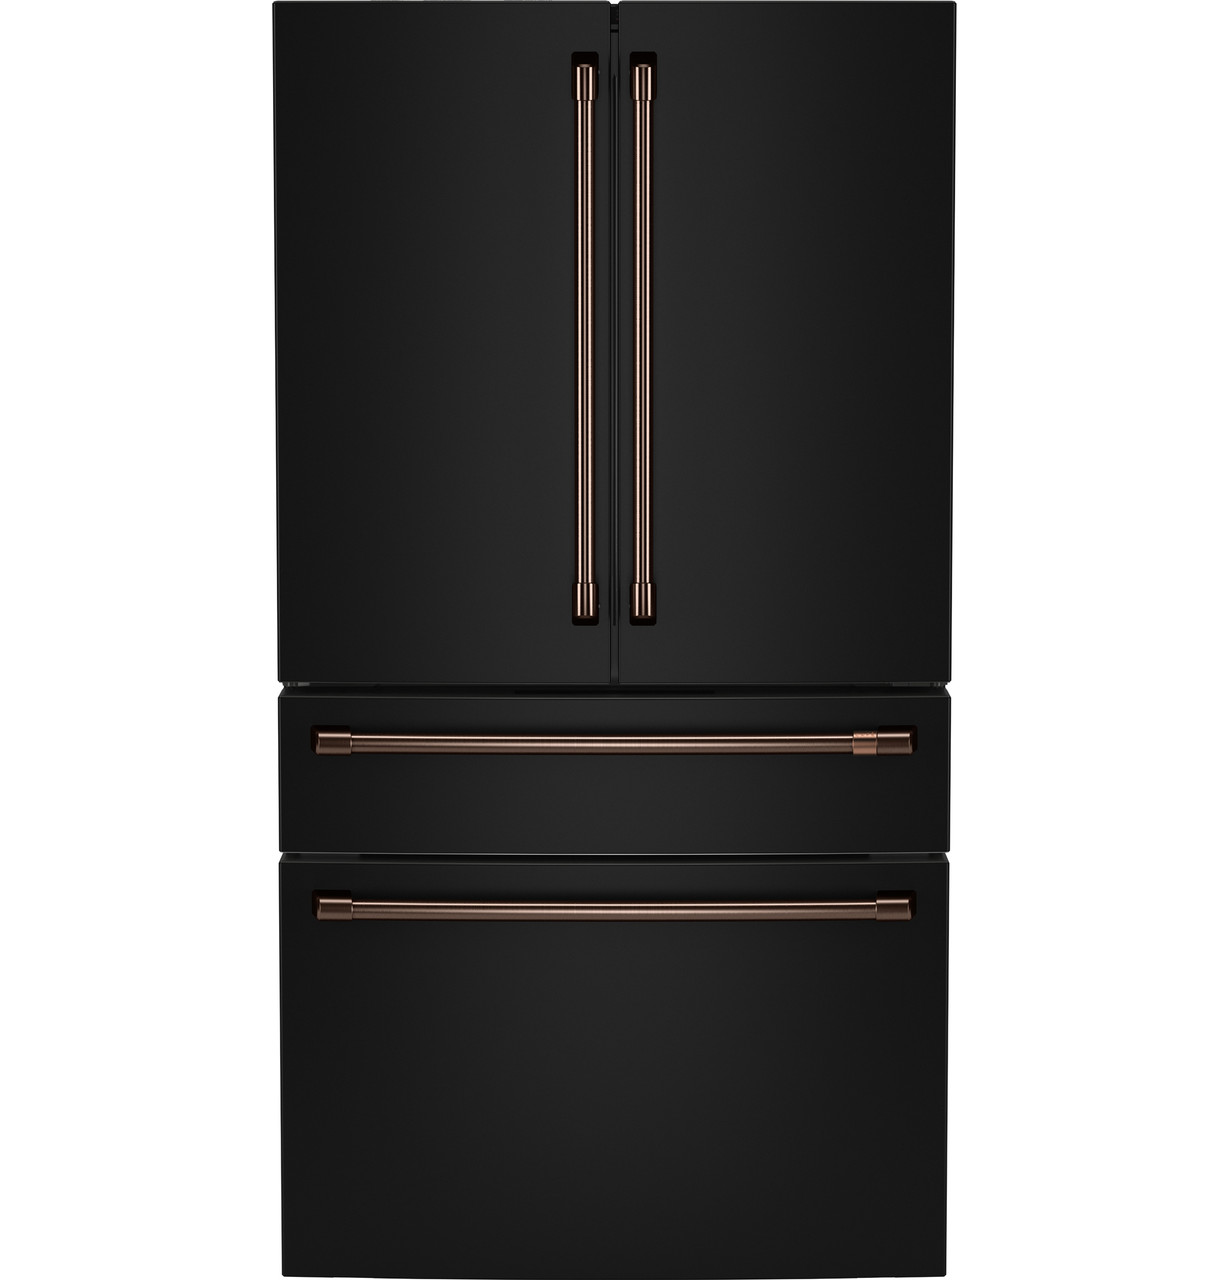 Café™ ENERGY STAR® 22.1 Cu. Ft. Counter-Depth French-Door Refrigerator with  Keurig® K-Cup® Brewing System - CYE22UP3MD1 - Cafe Appliances